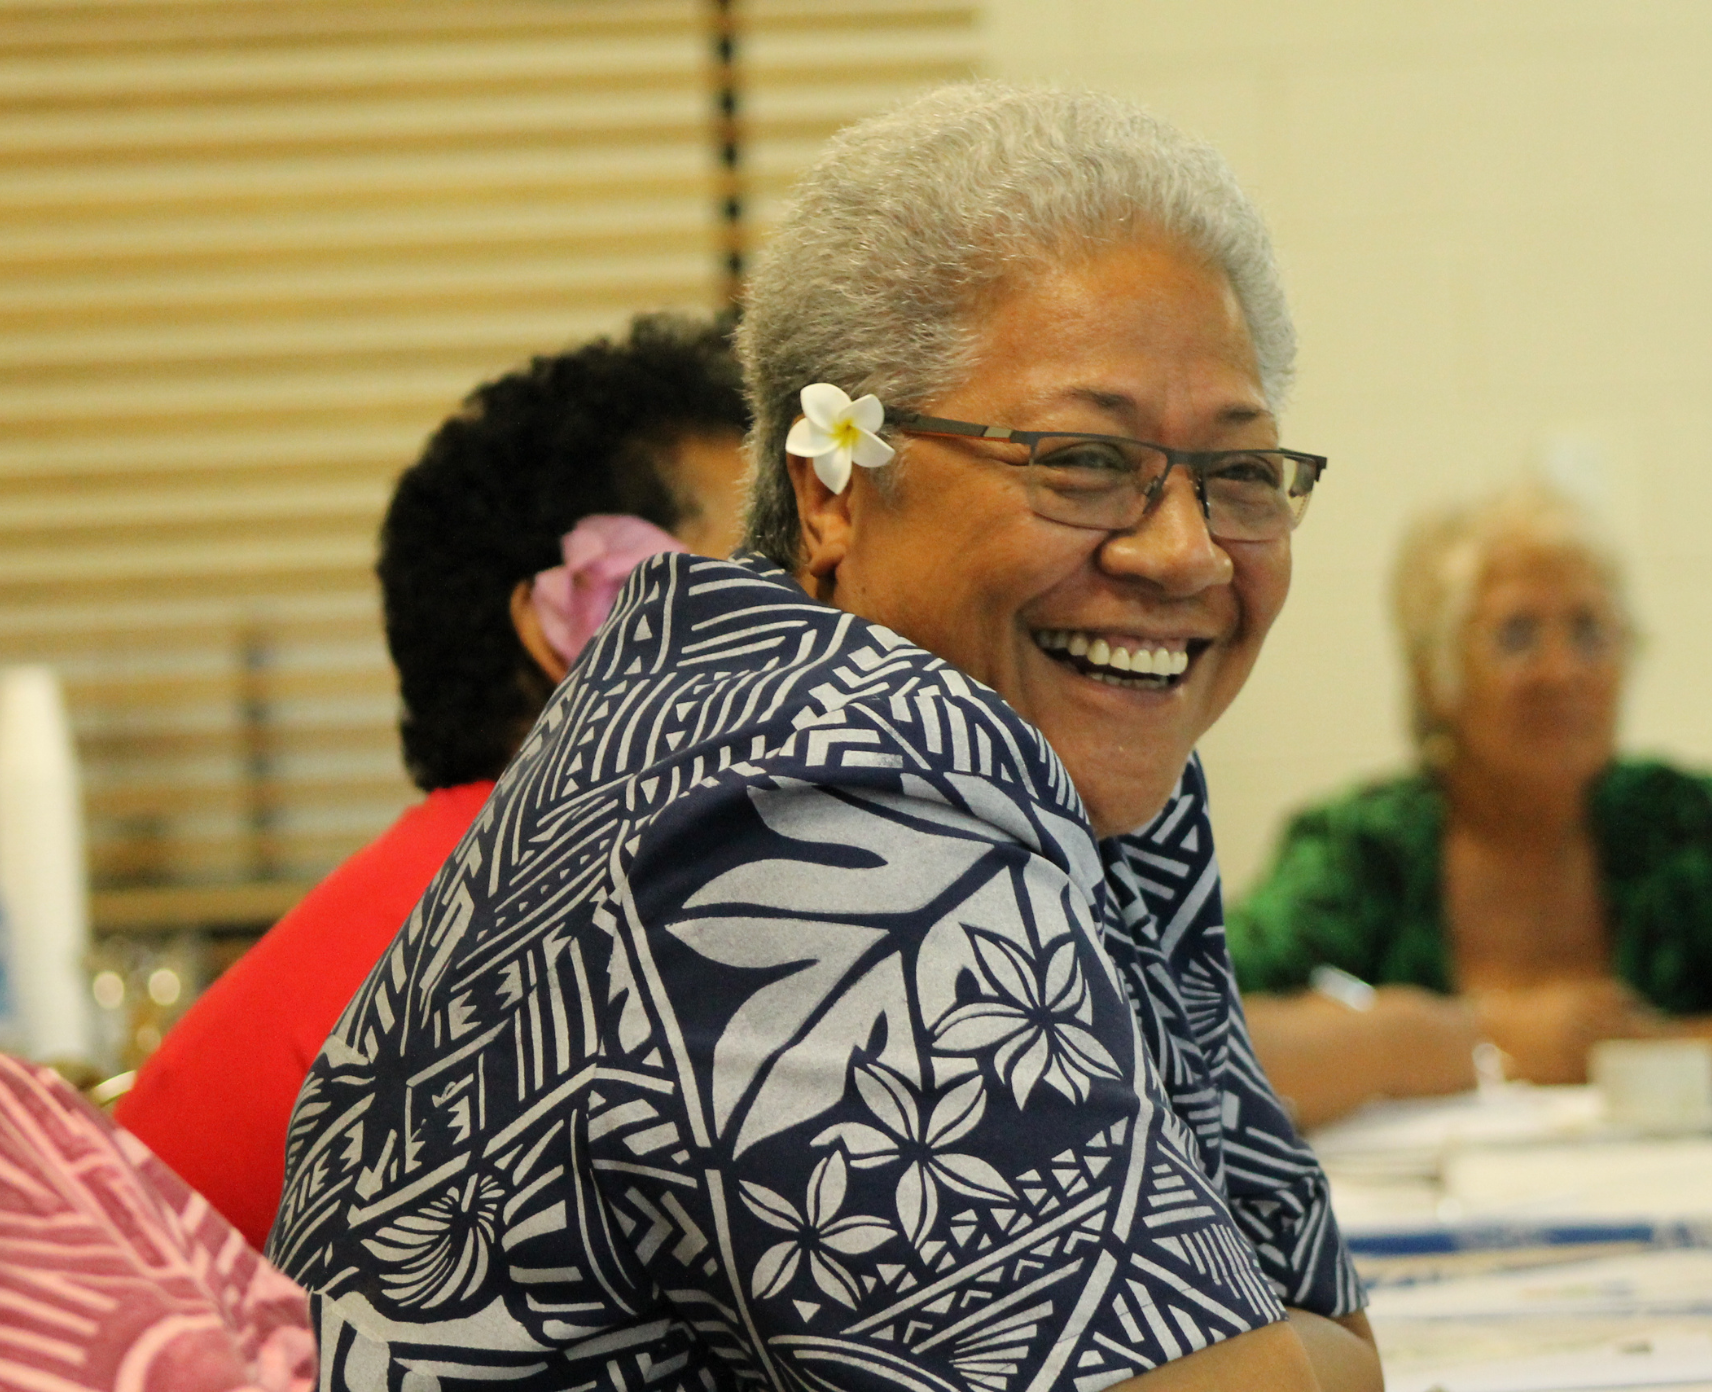 Fiame Naomi Mata’afa, a woman with short, grey hair, is seated at a table with a small white flower tucked behind her ear.